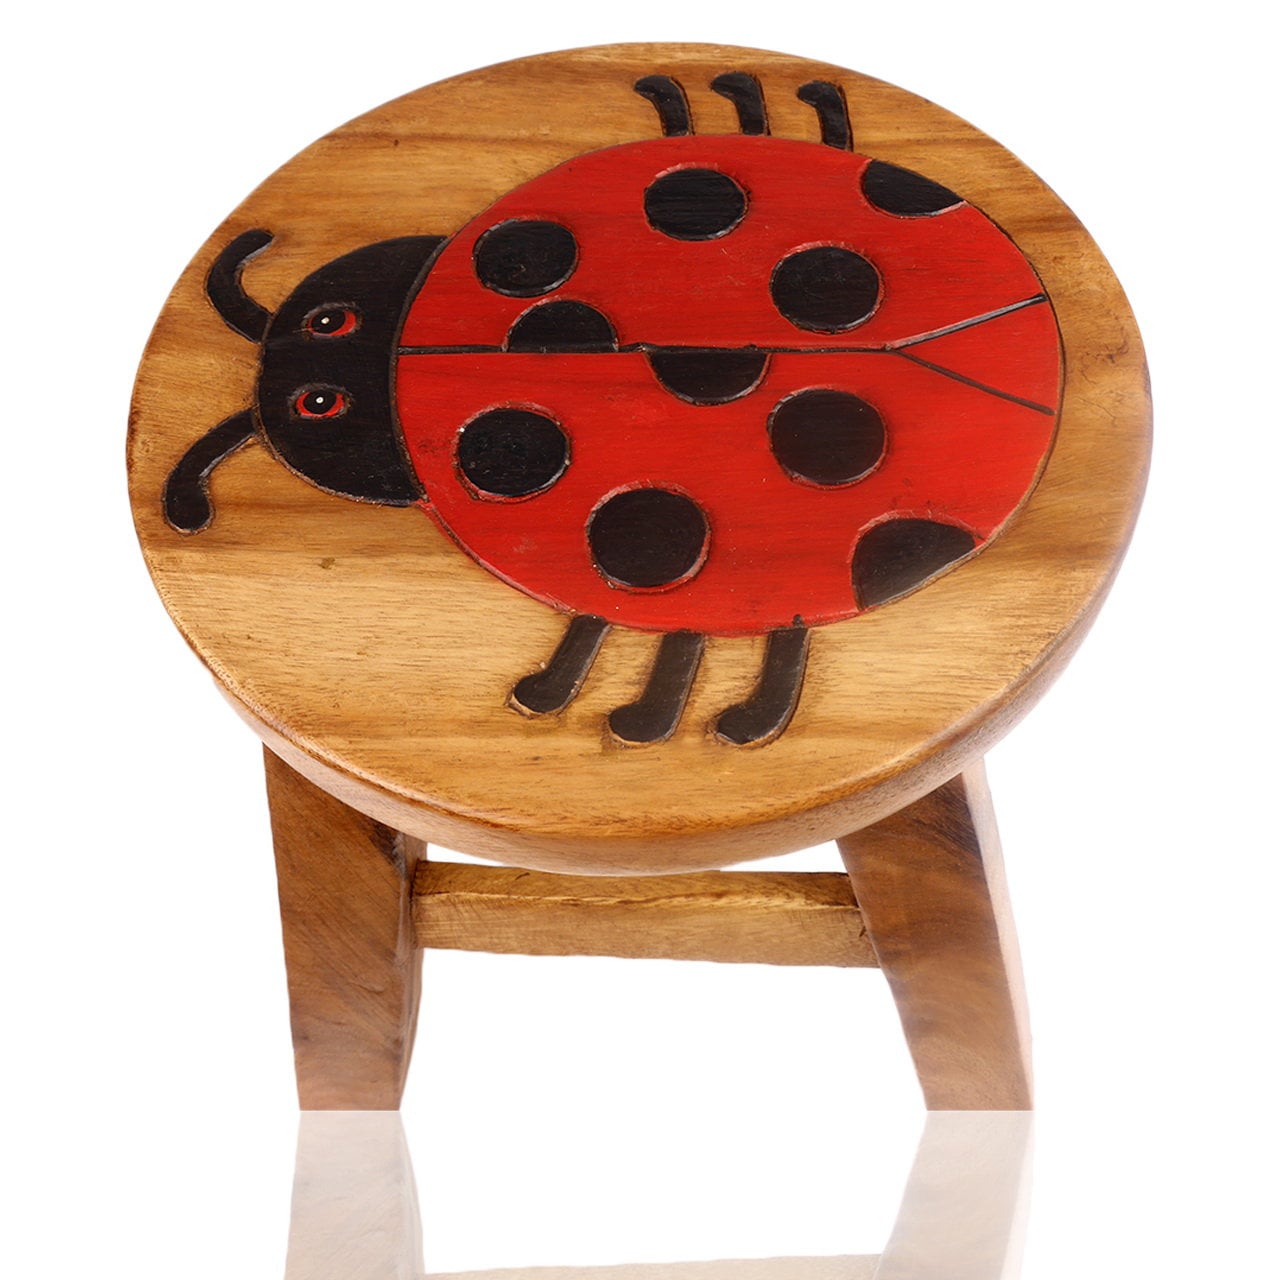 Children's stool wooden stool with animal motif ladybug painted and carved height 25 cm